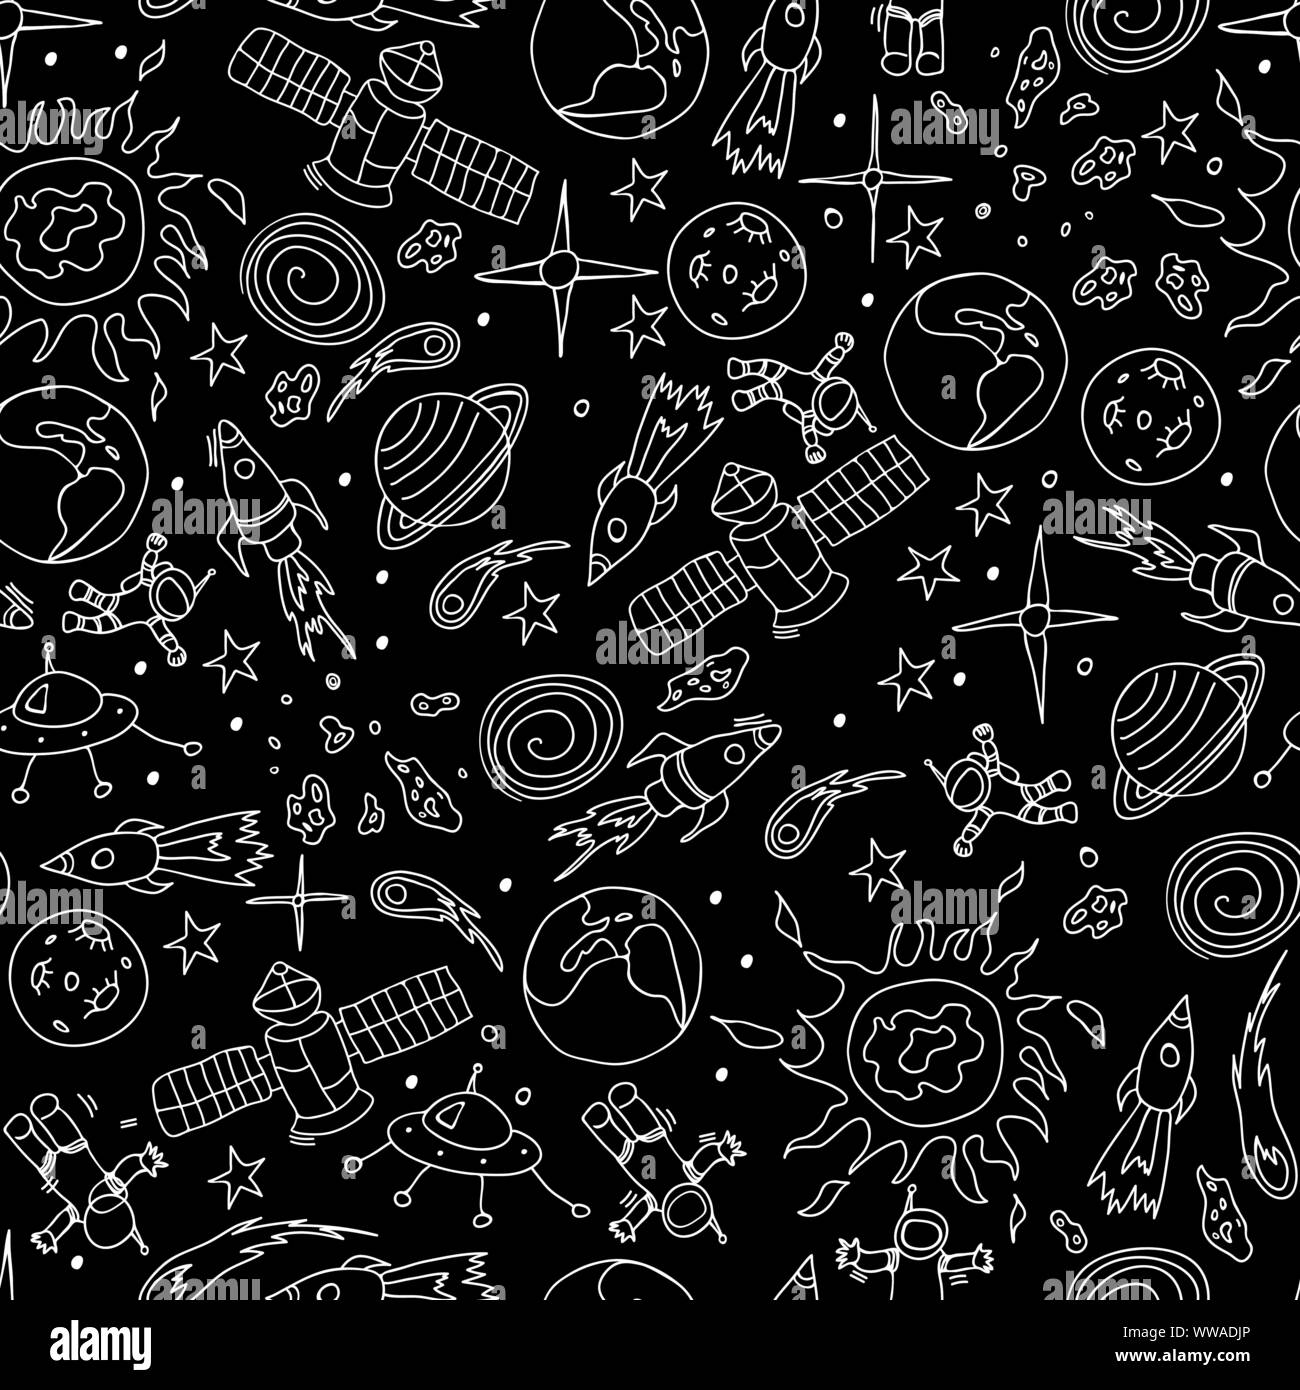 Seamless pattern with hand drawn cosmic objects. White cartoon drawings ...